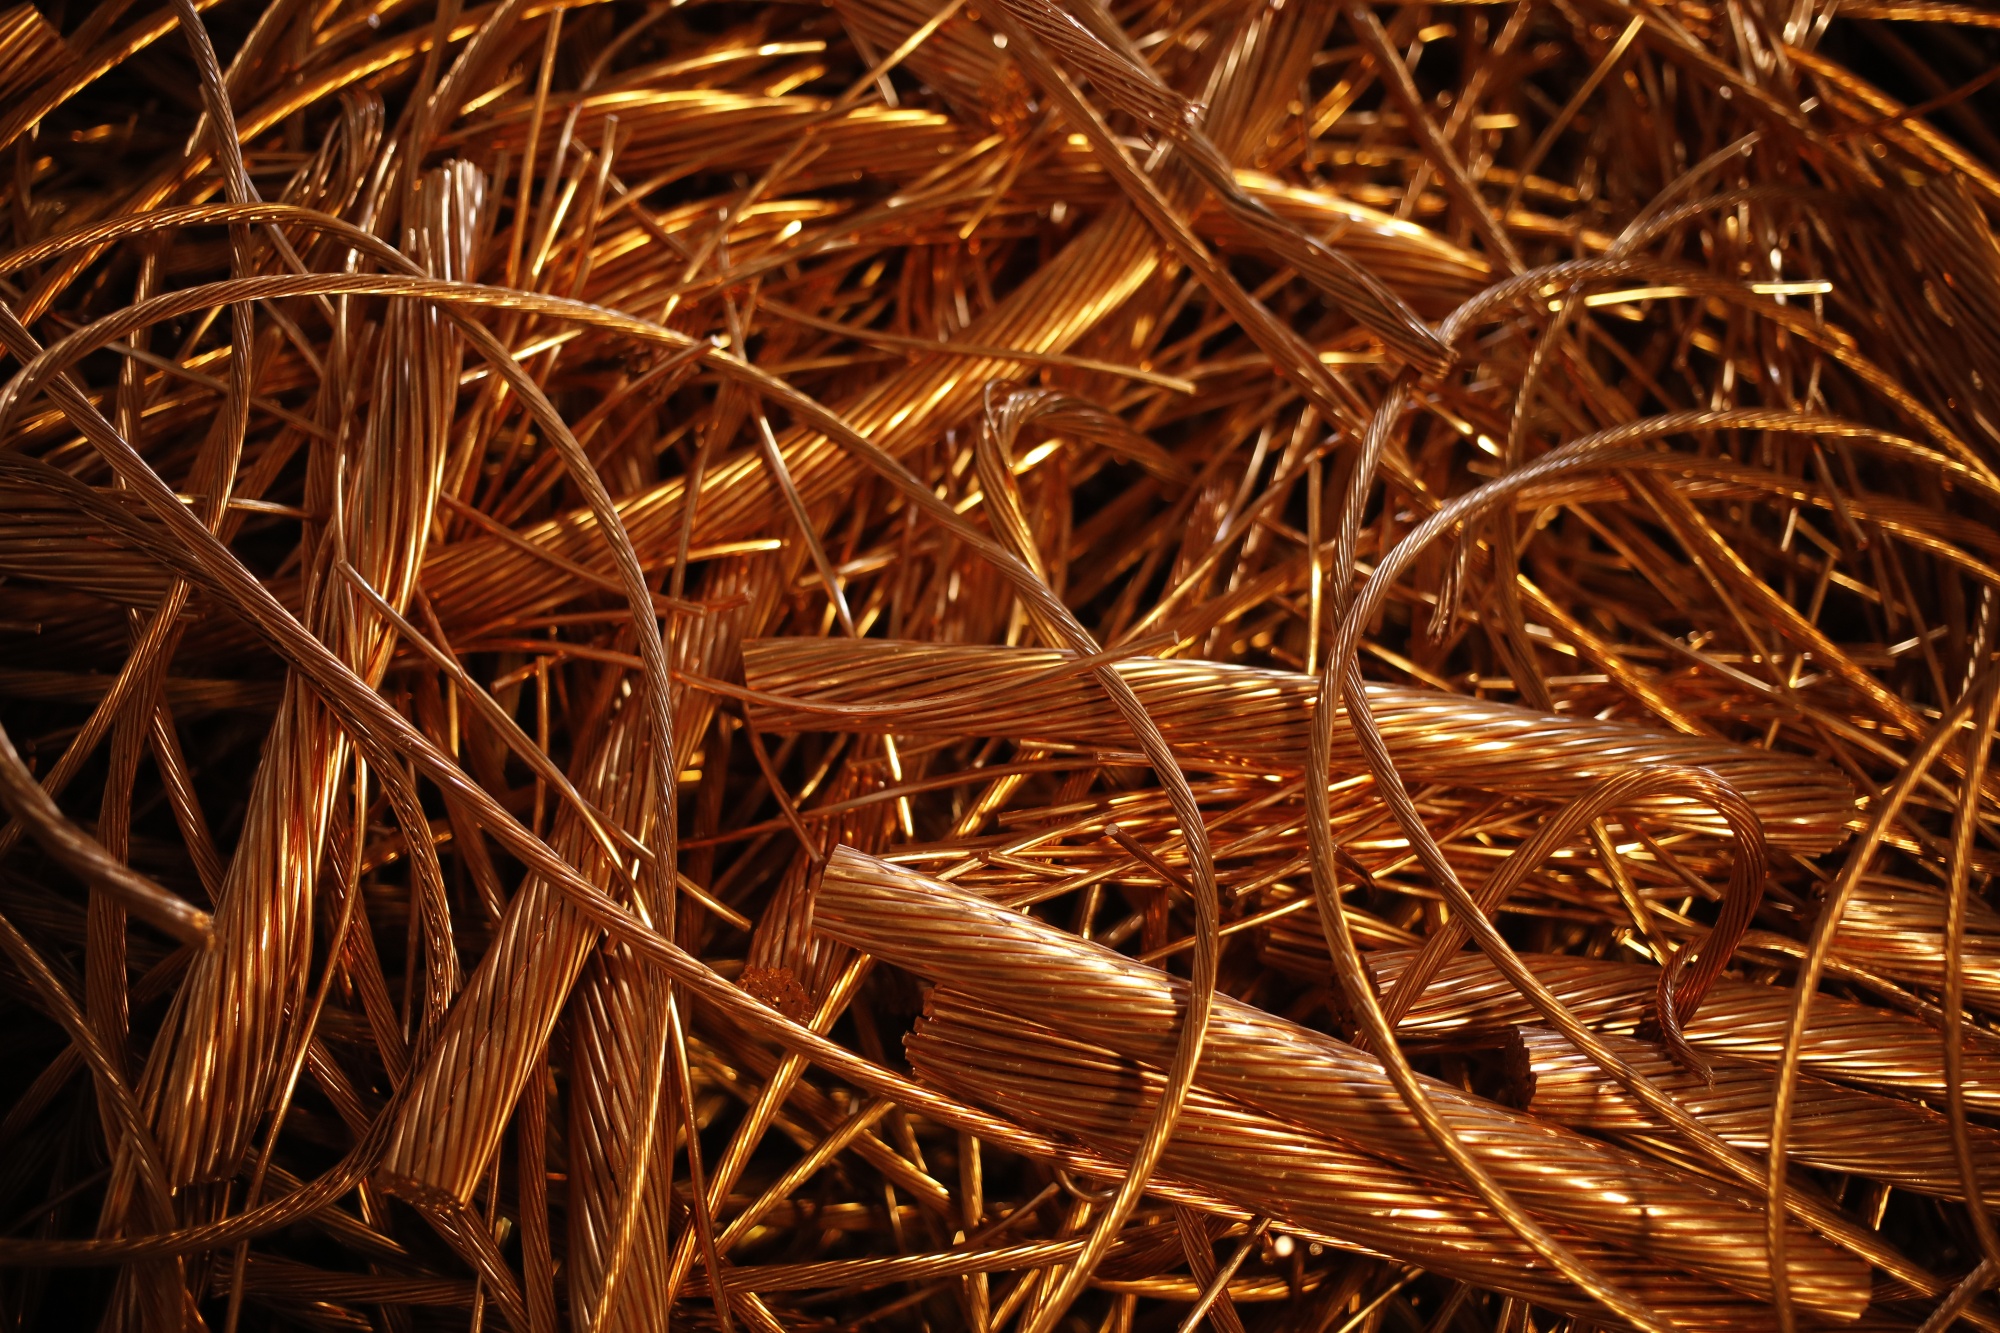 Copper wire at a scrap metal recycling center in Louisville, Kentucky.